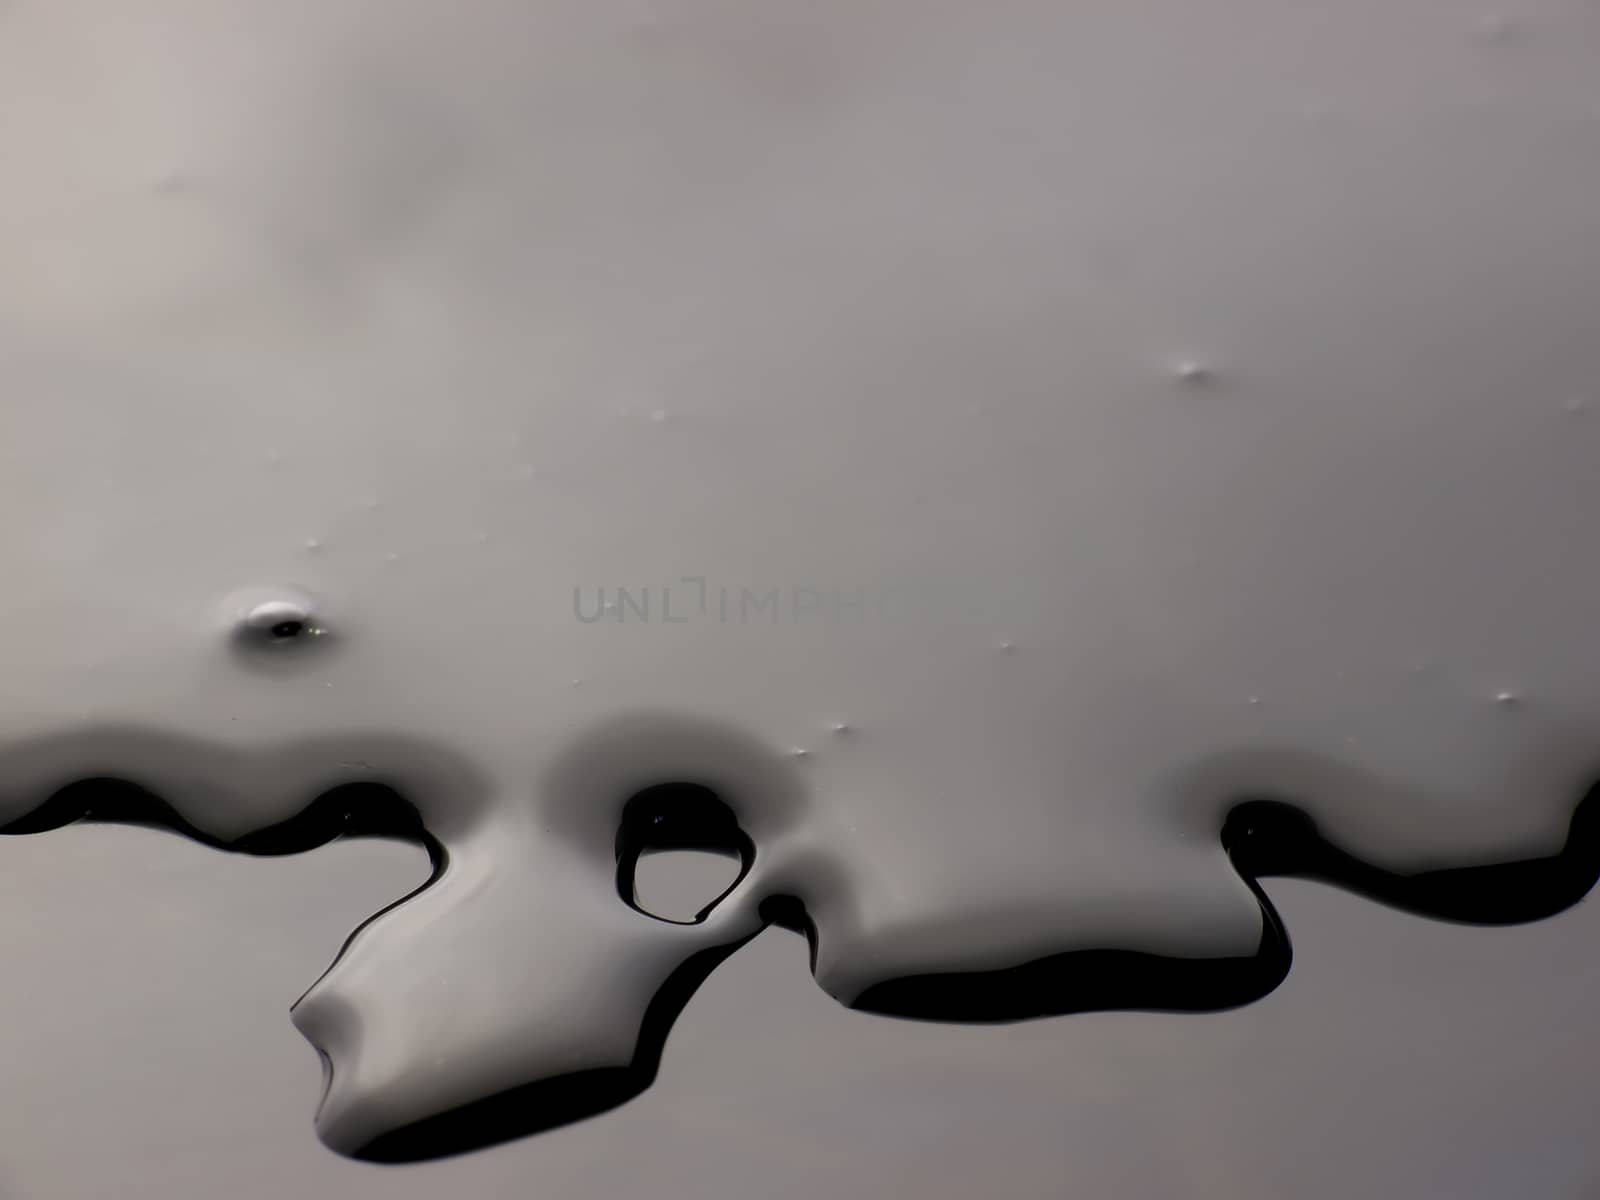 abstract background with liquid silver